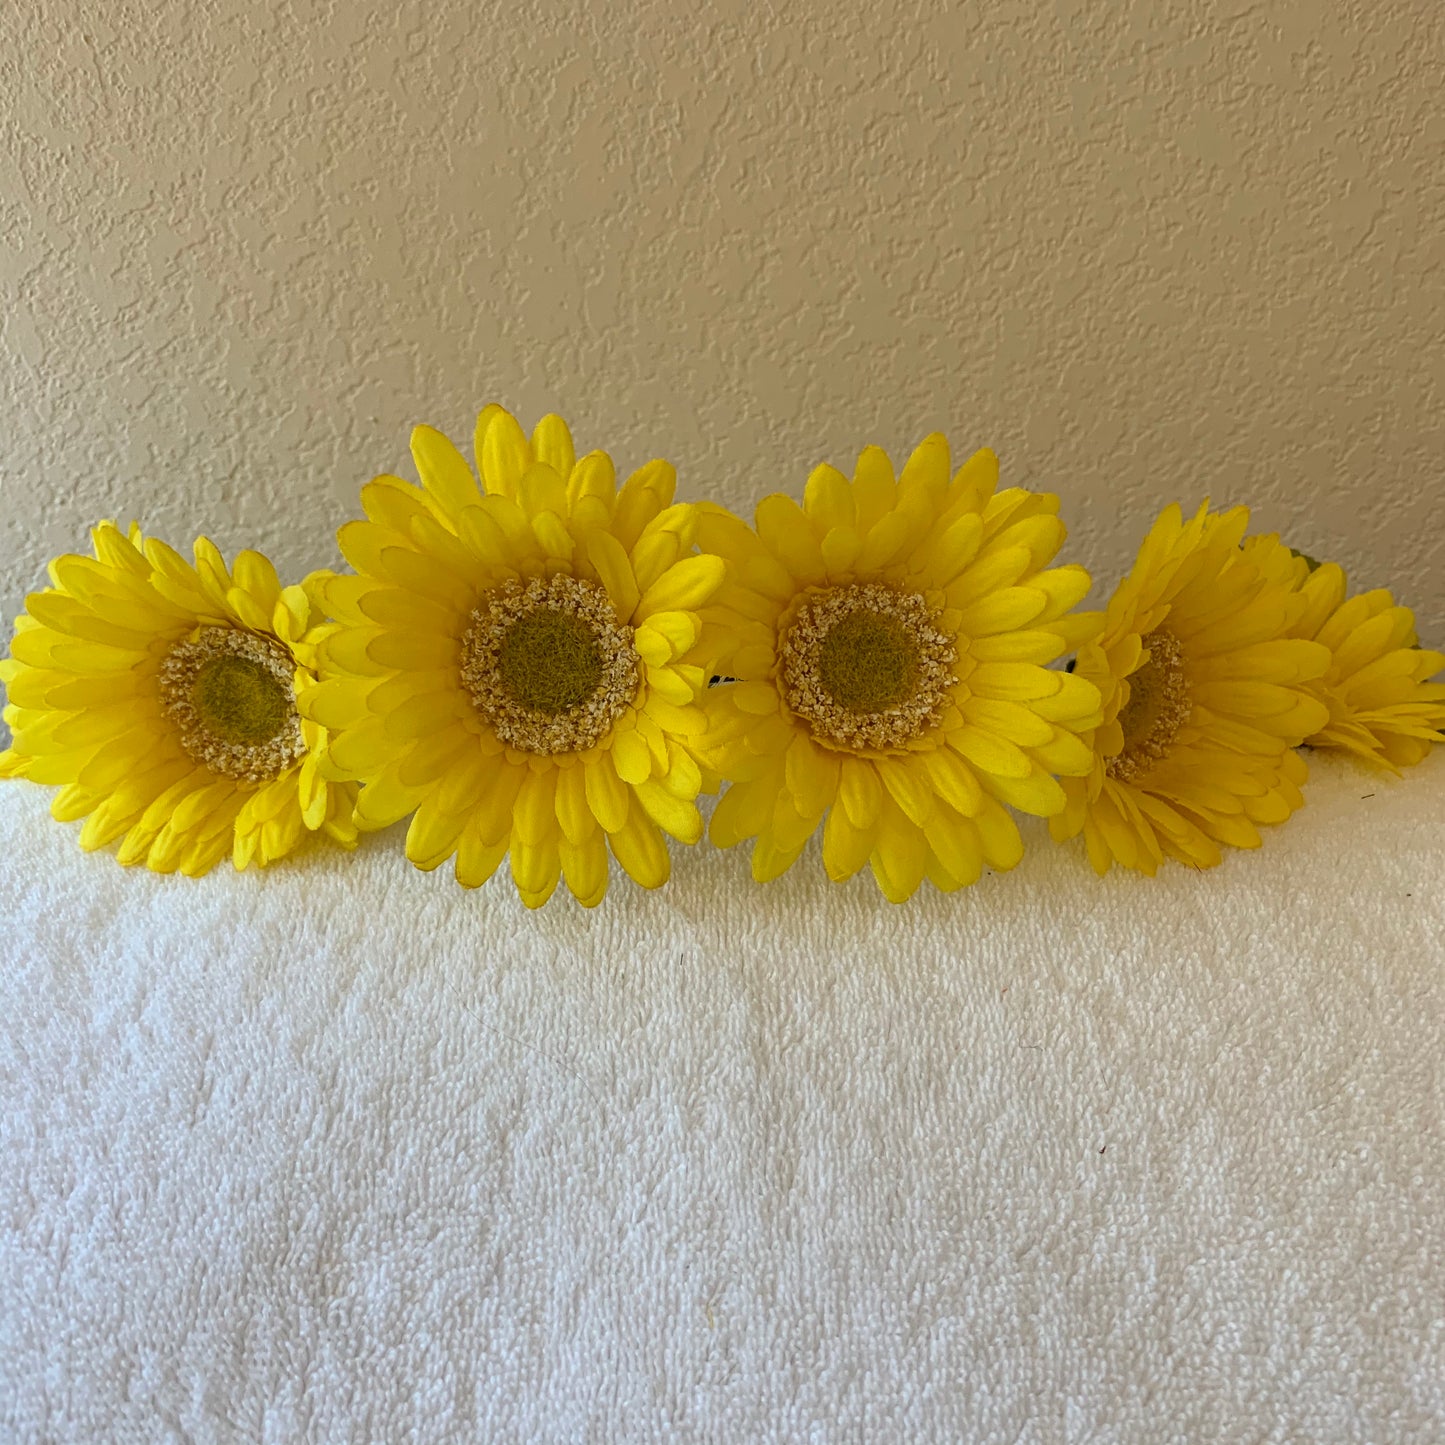 Large Wreath Lighted - All Yellow Daisies